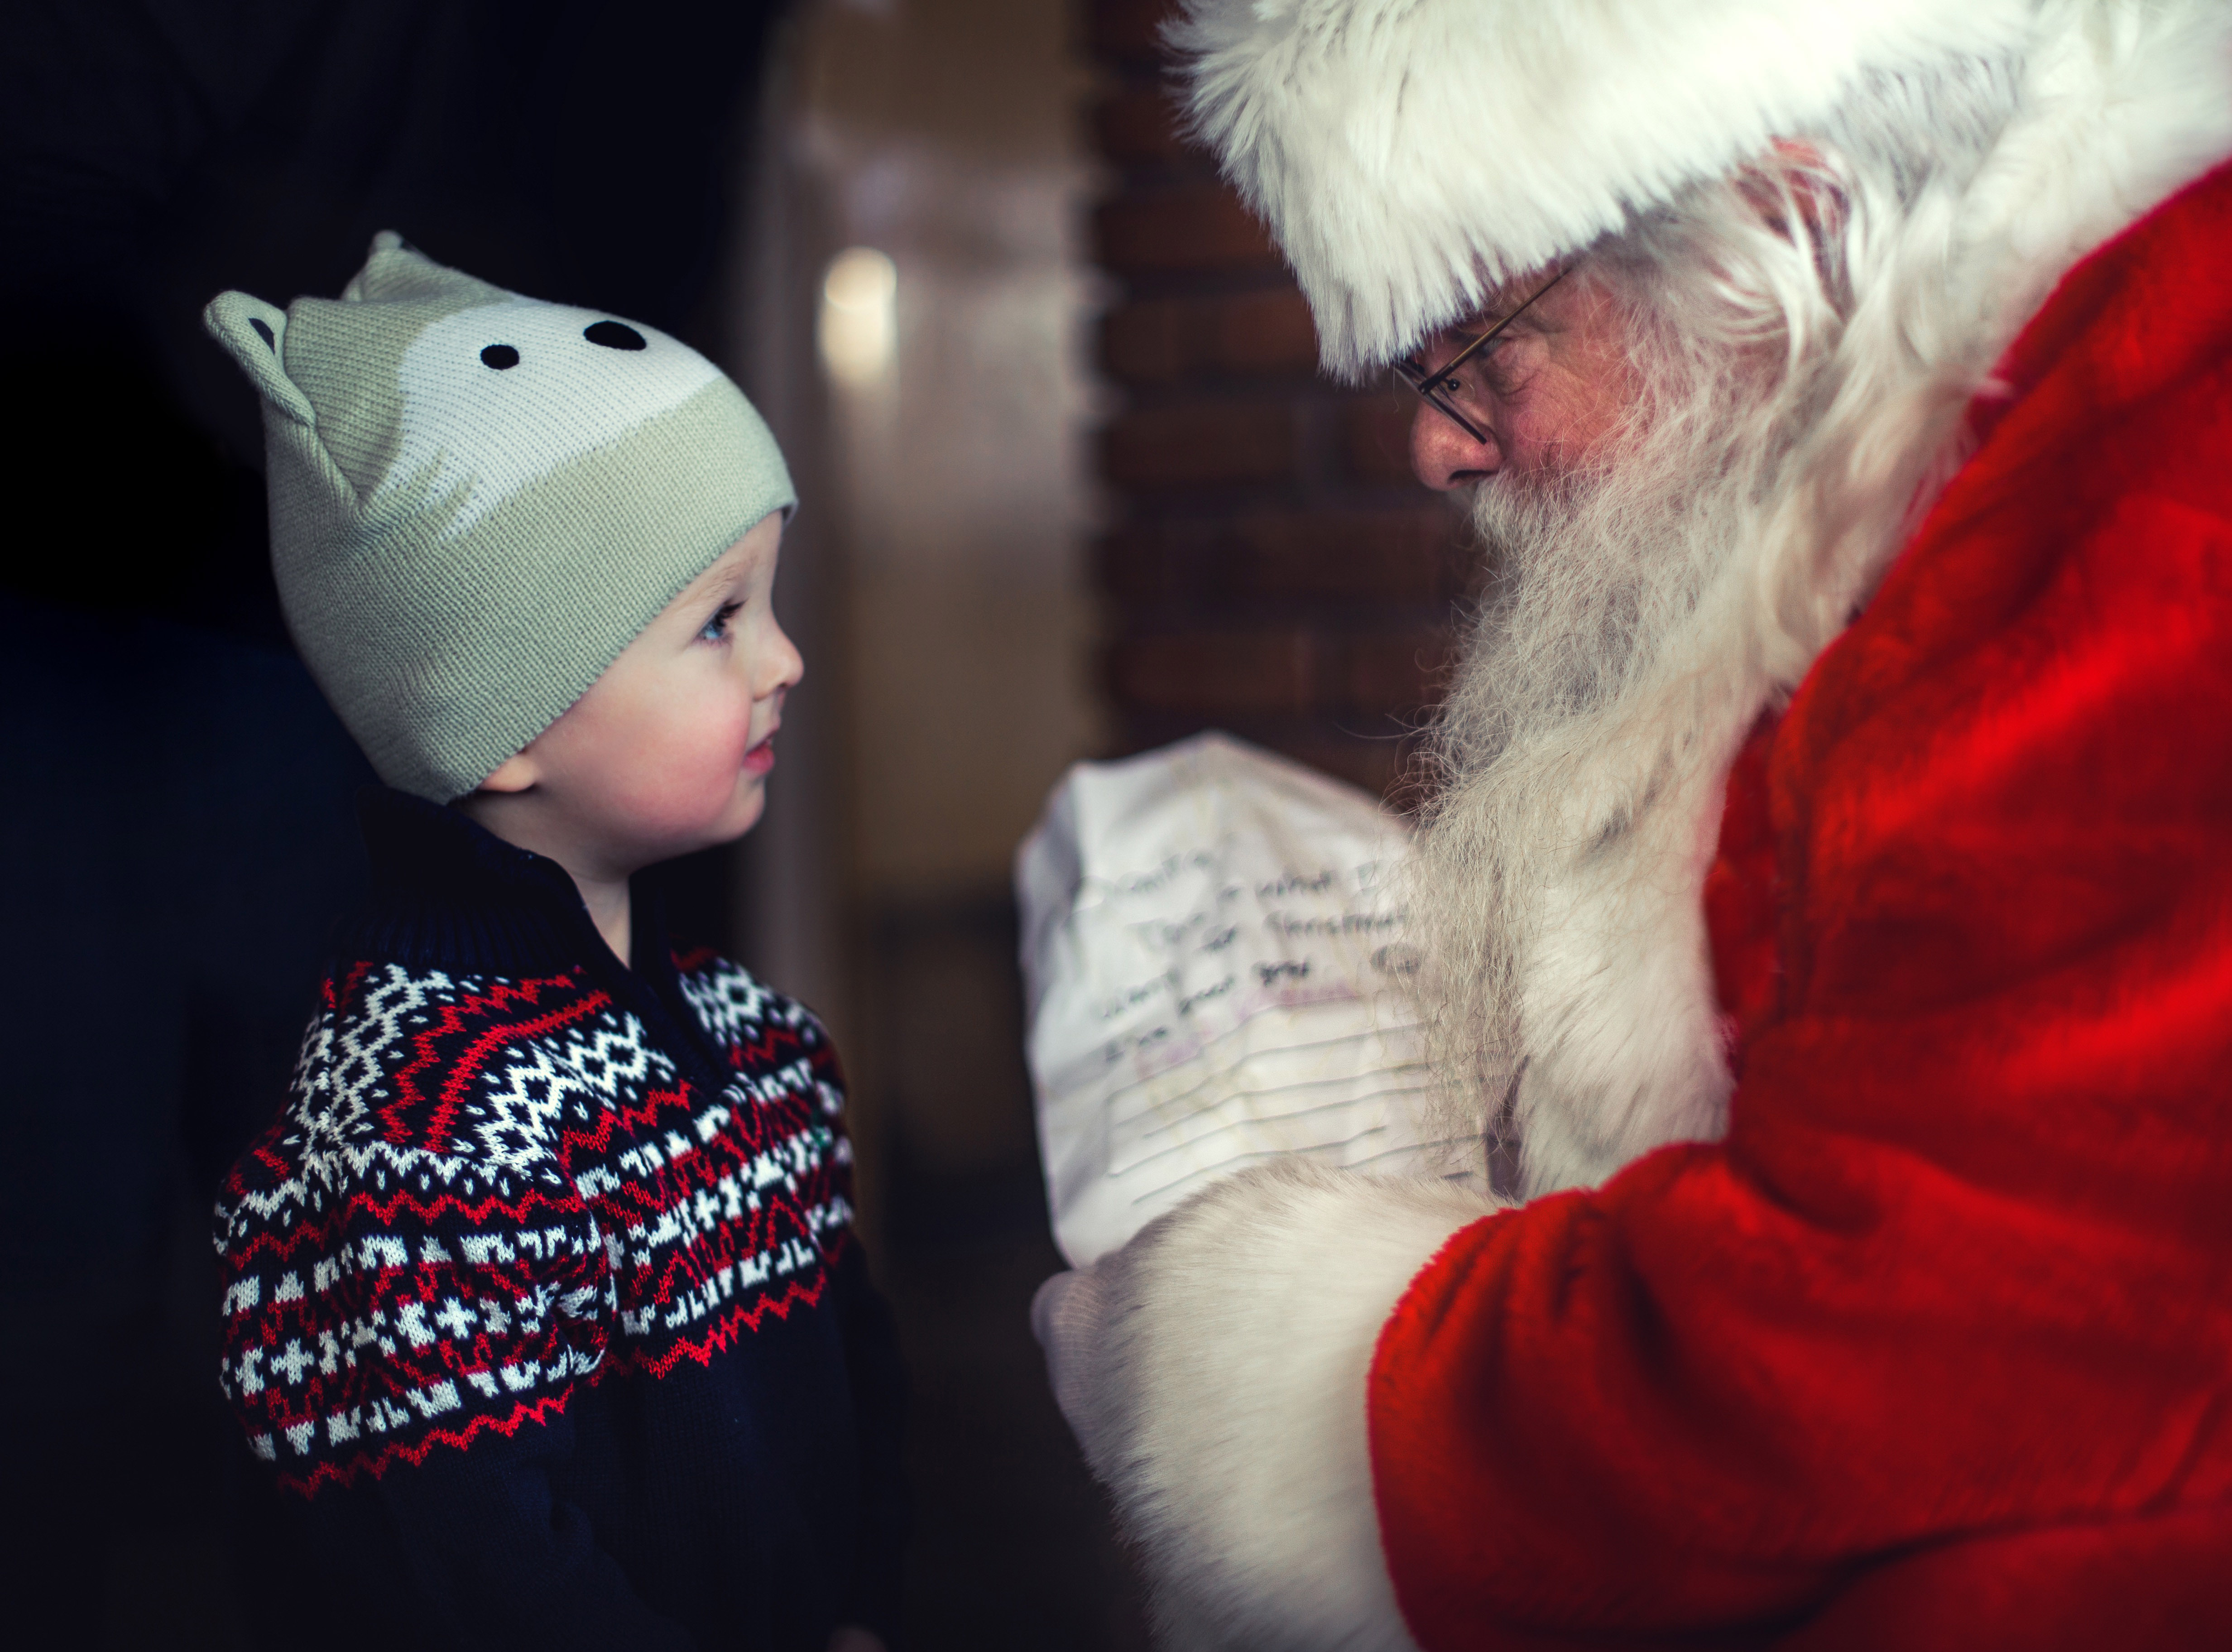 Santa talking with a young child image Free stock photo